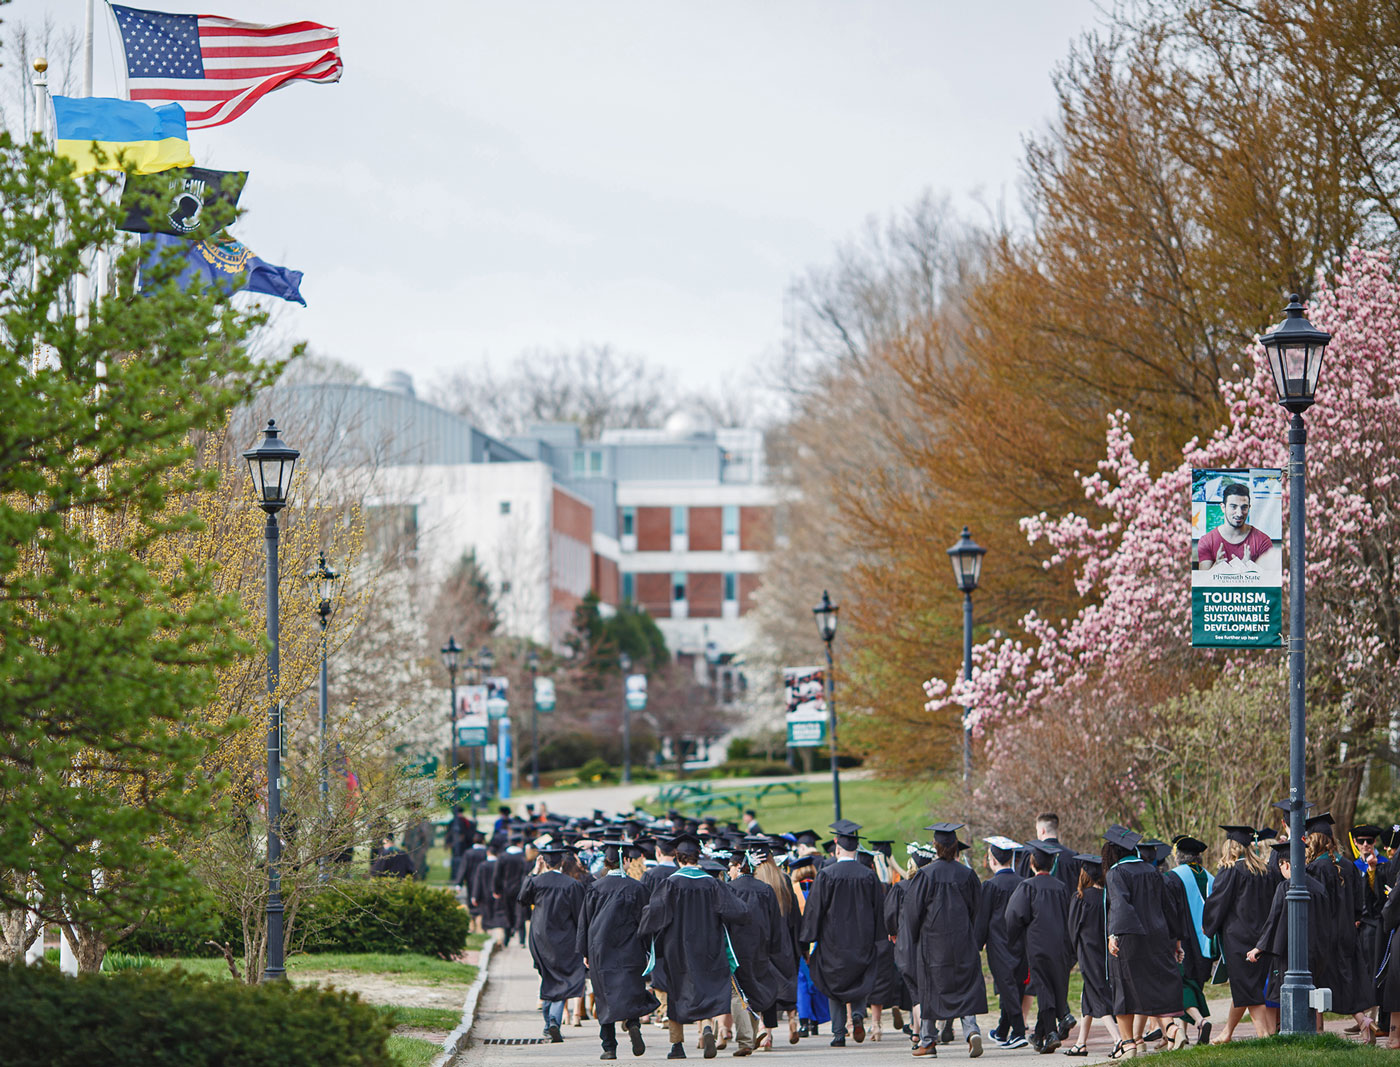 Graduates walking in a large group